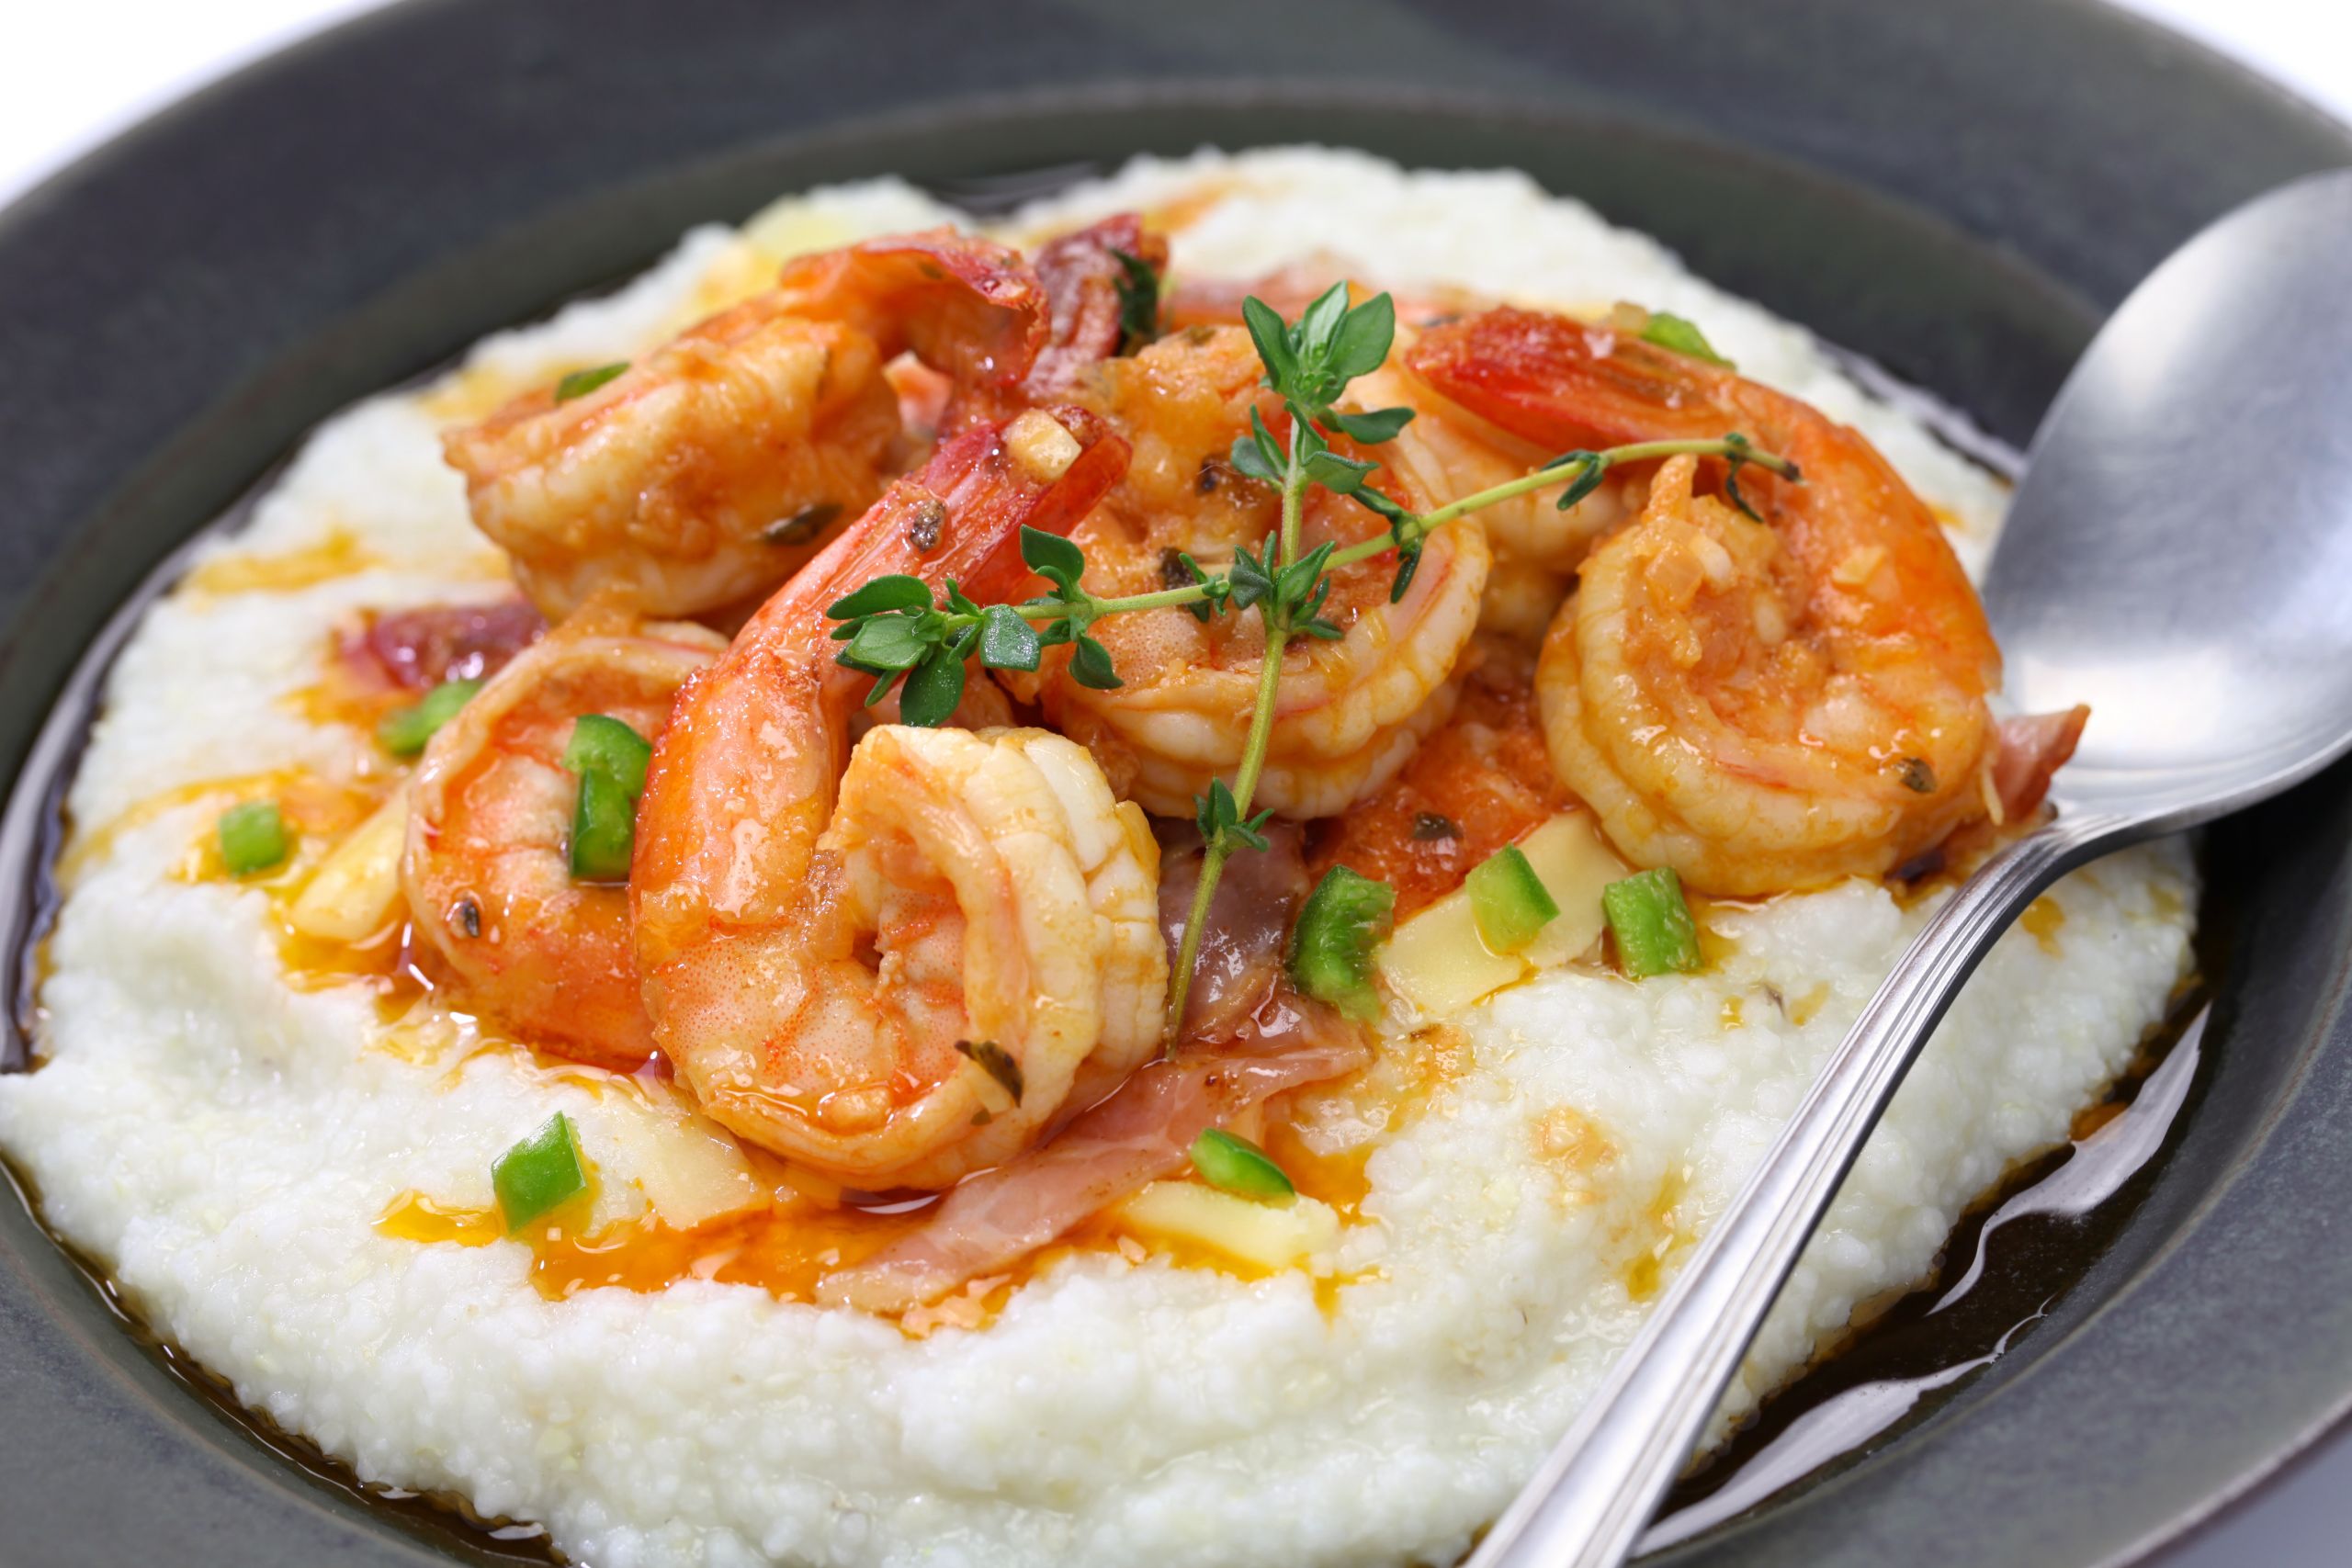 Recipes For Shrimp And Grits
 The Best Lowcountry Shrimp and Grits Recipe You Will Ever Try